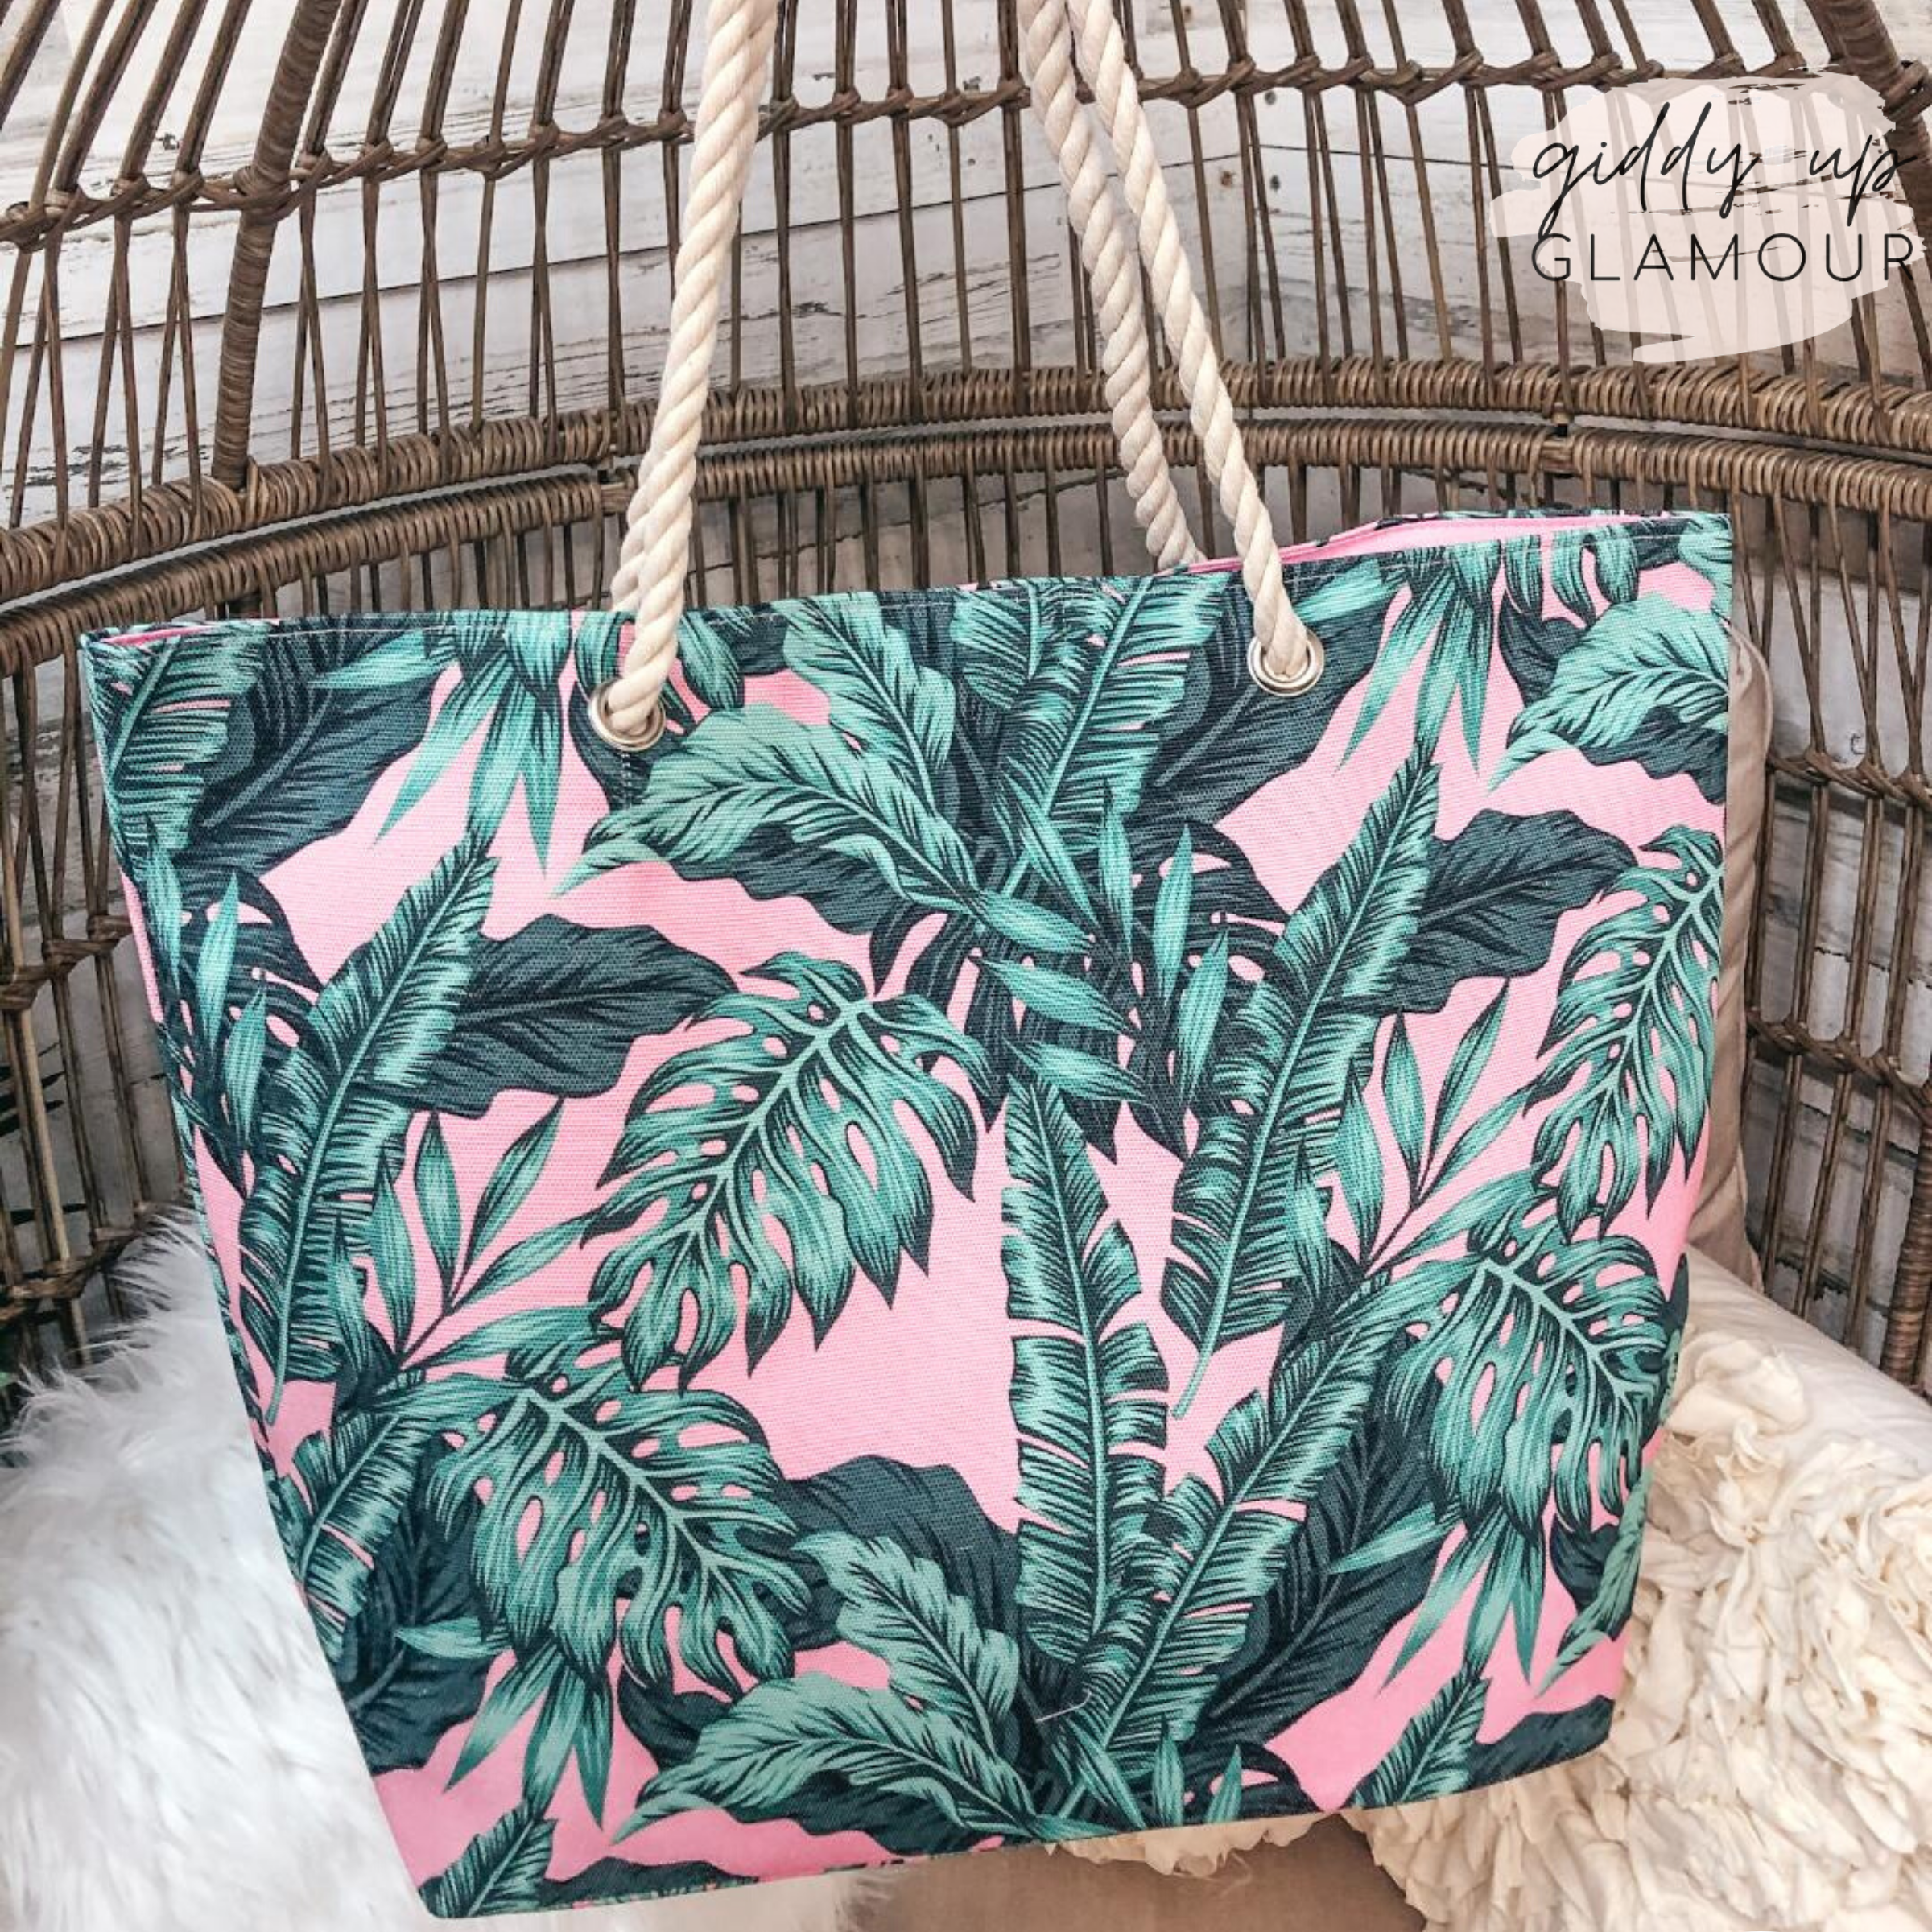 Green Palm Leaf Tote Bag with Rope Straps in Pink - Giddy Up Glamour Boutique